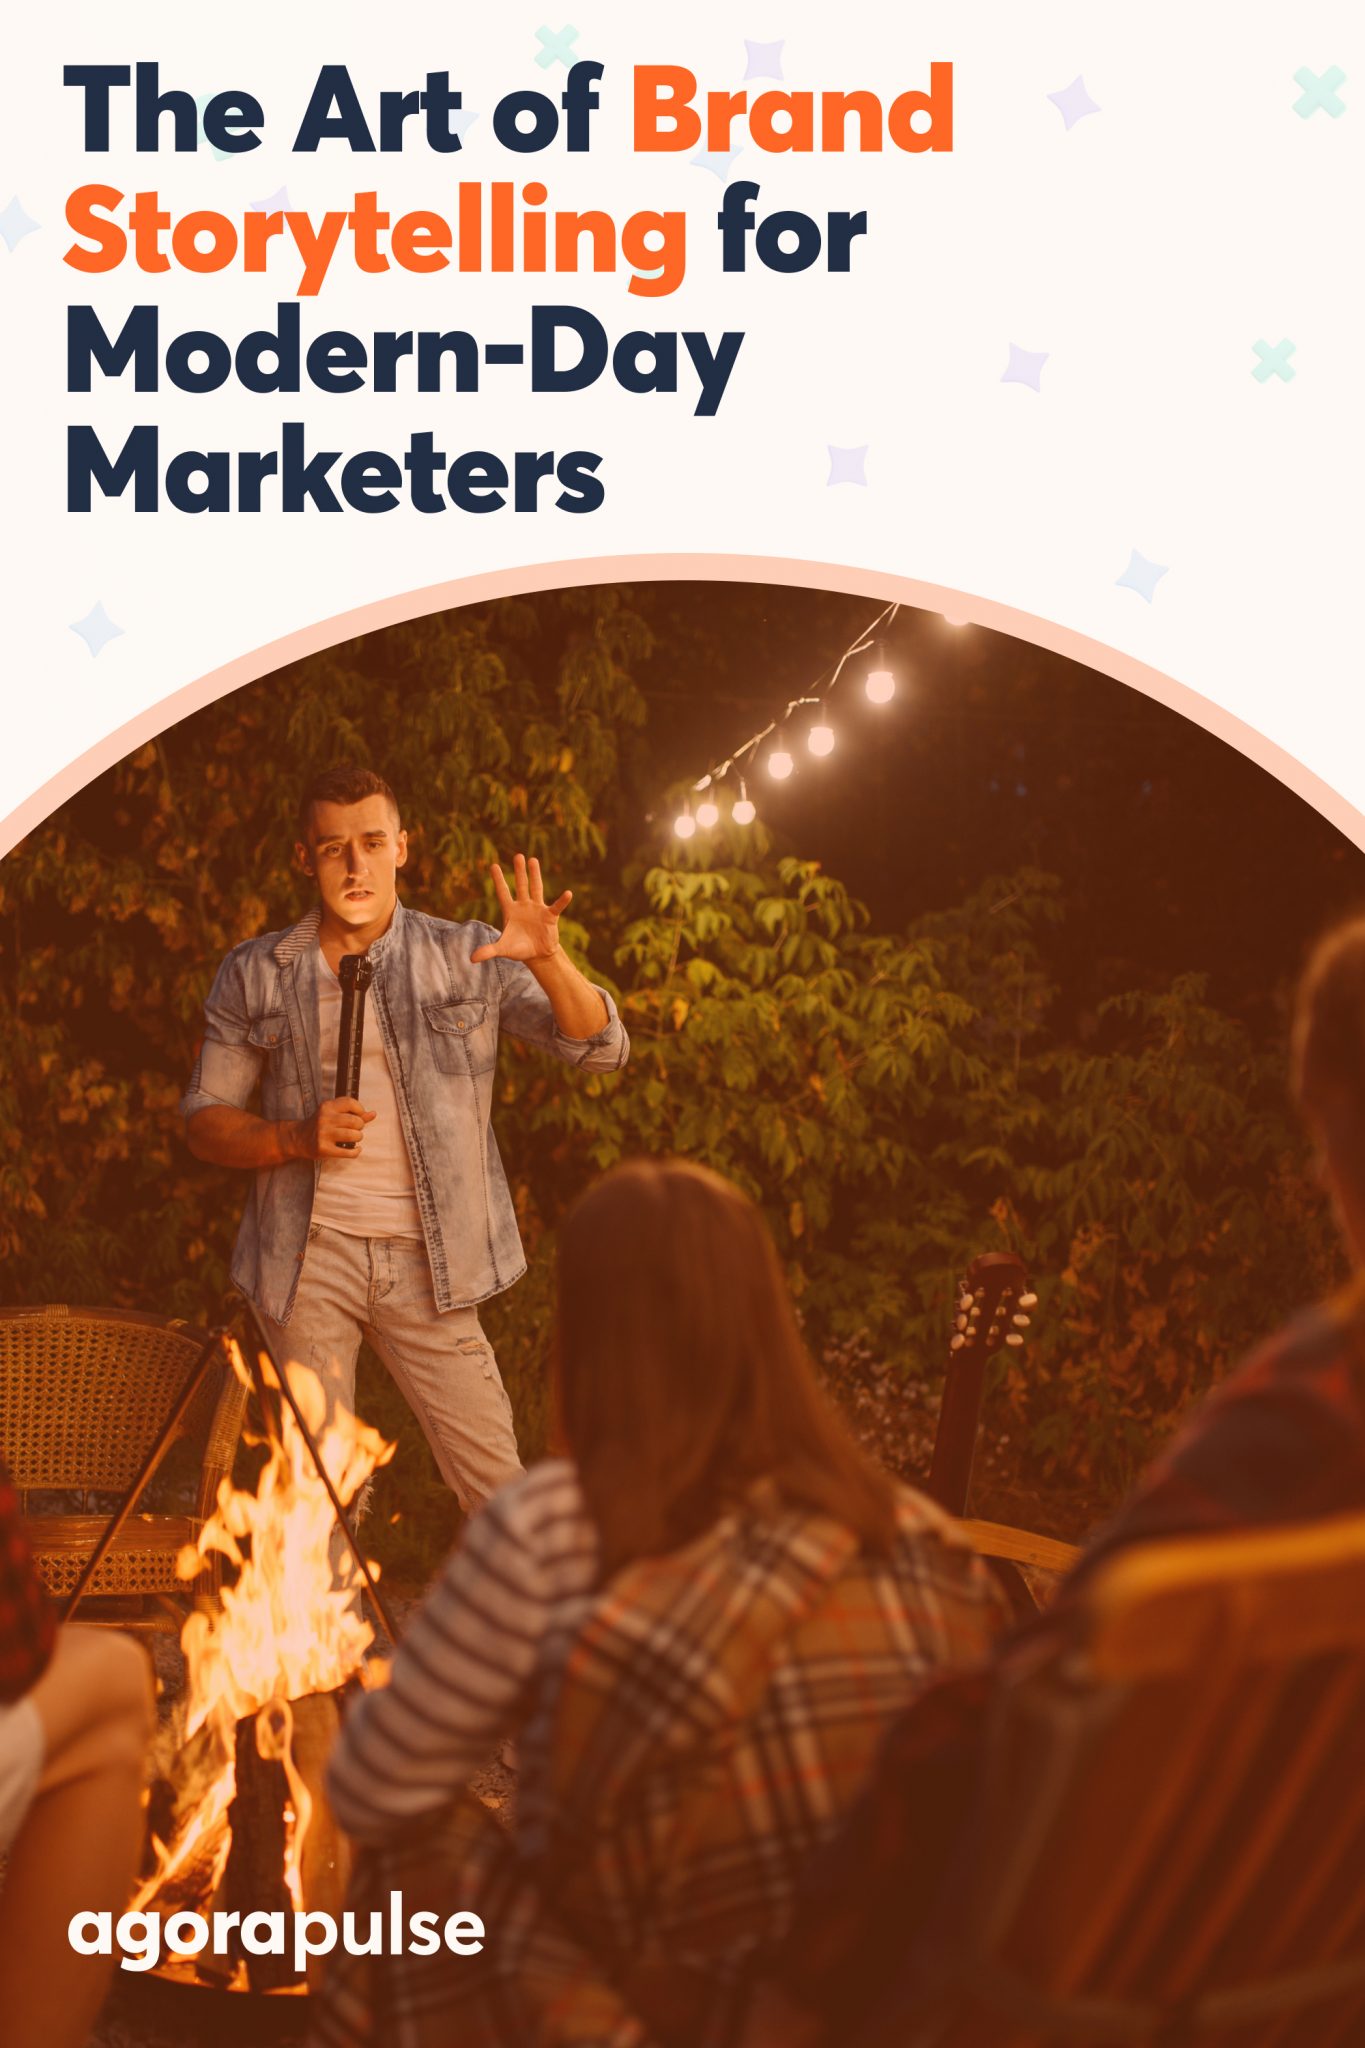 The Art of Brand Storytelling for Modern-Day Marketers [Free Ebook]